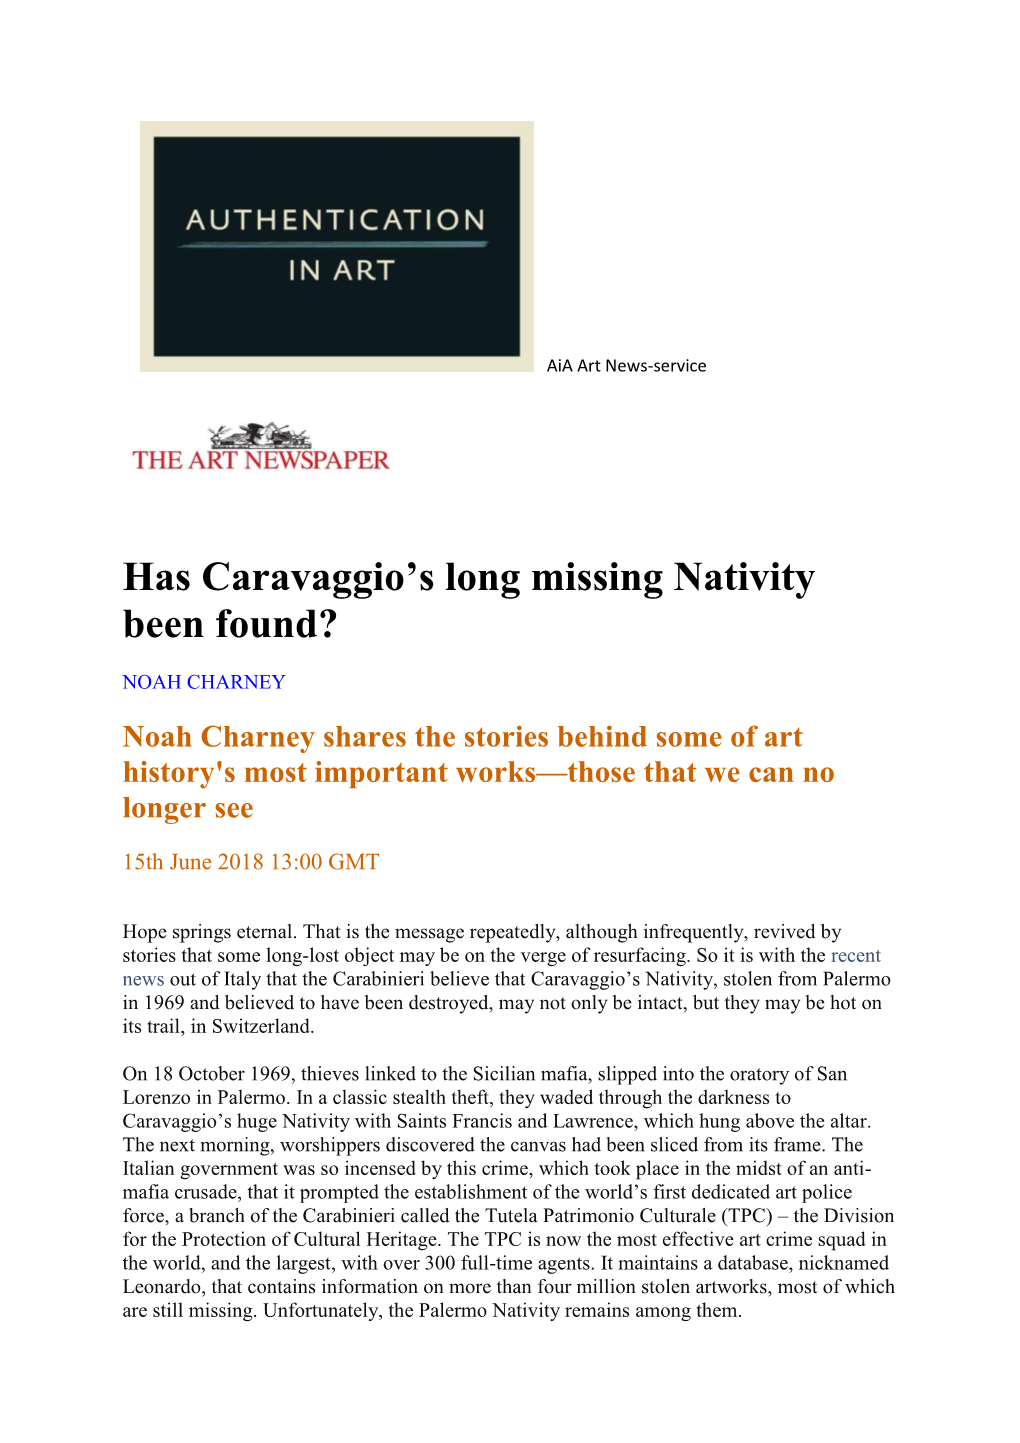 Has Caravaggio's Long Missing Nativity Been Found?